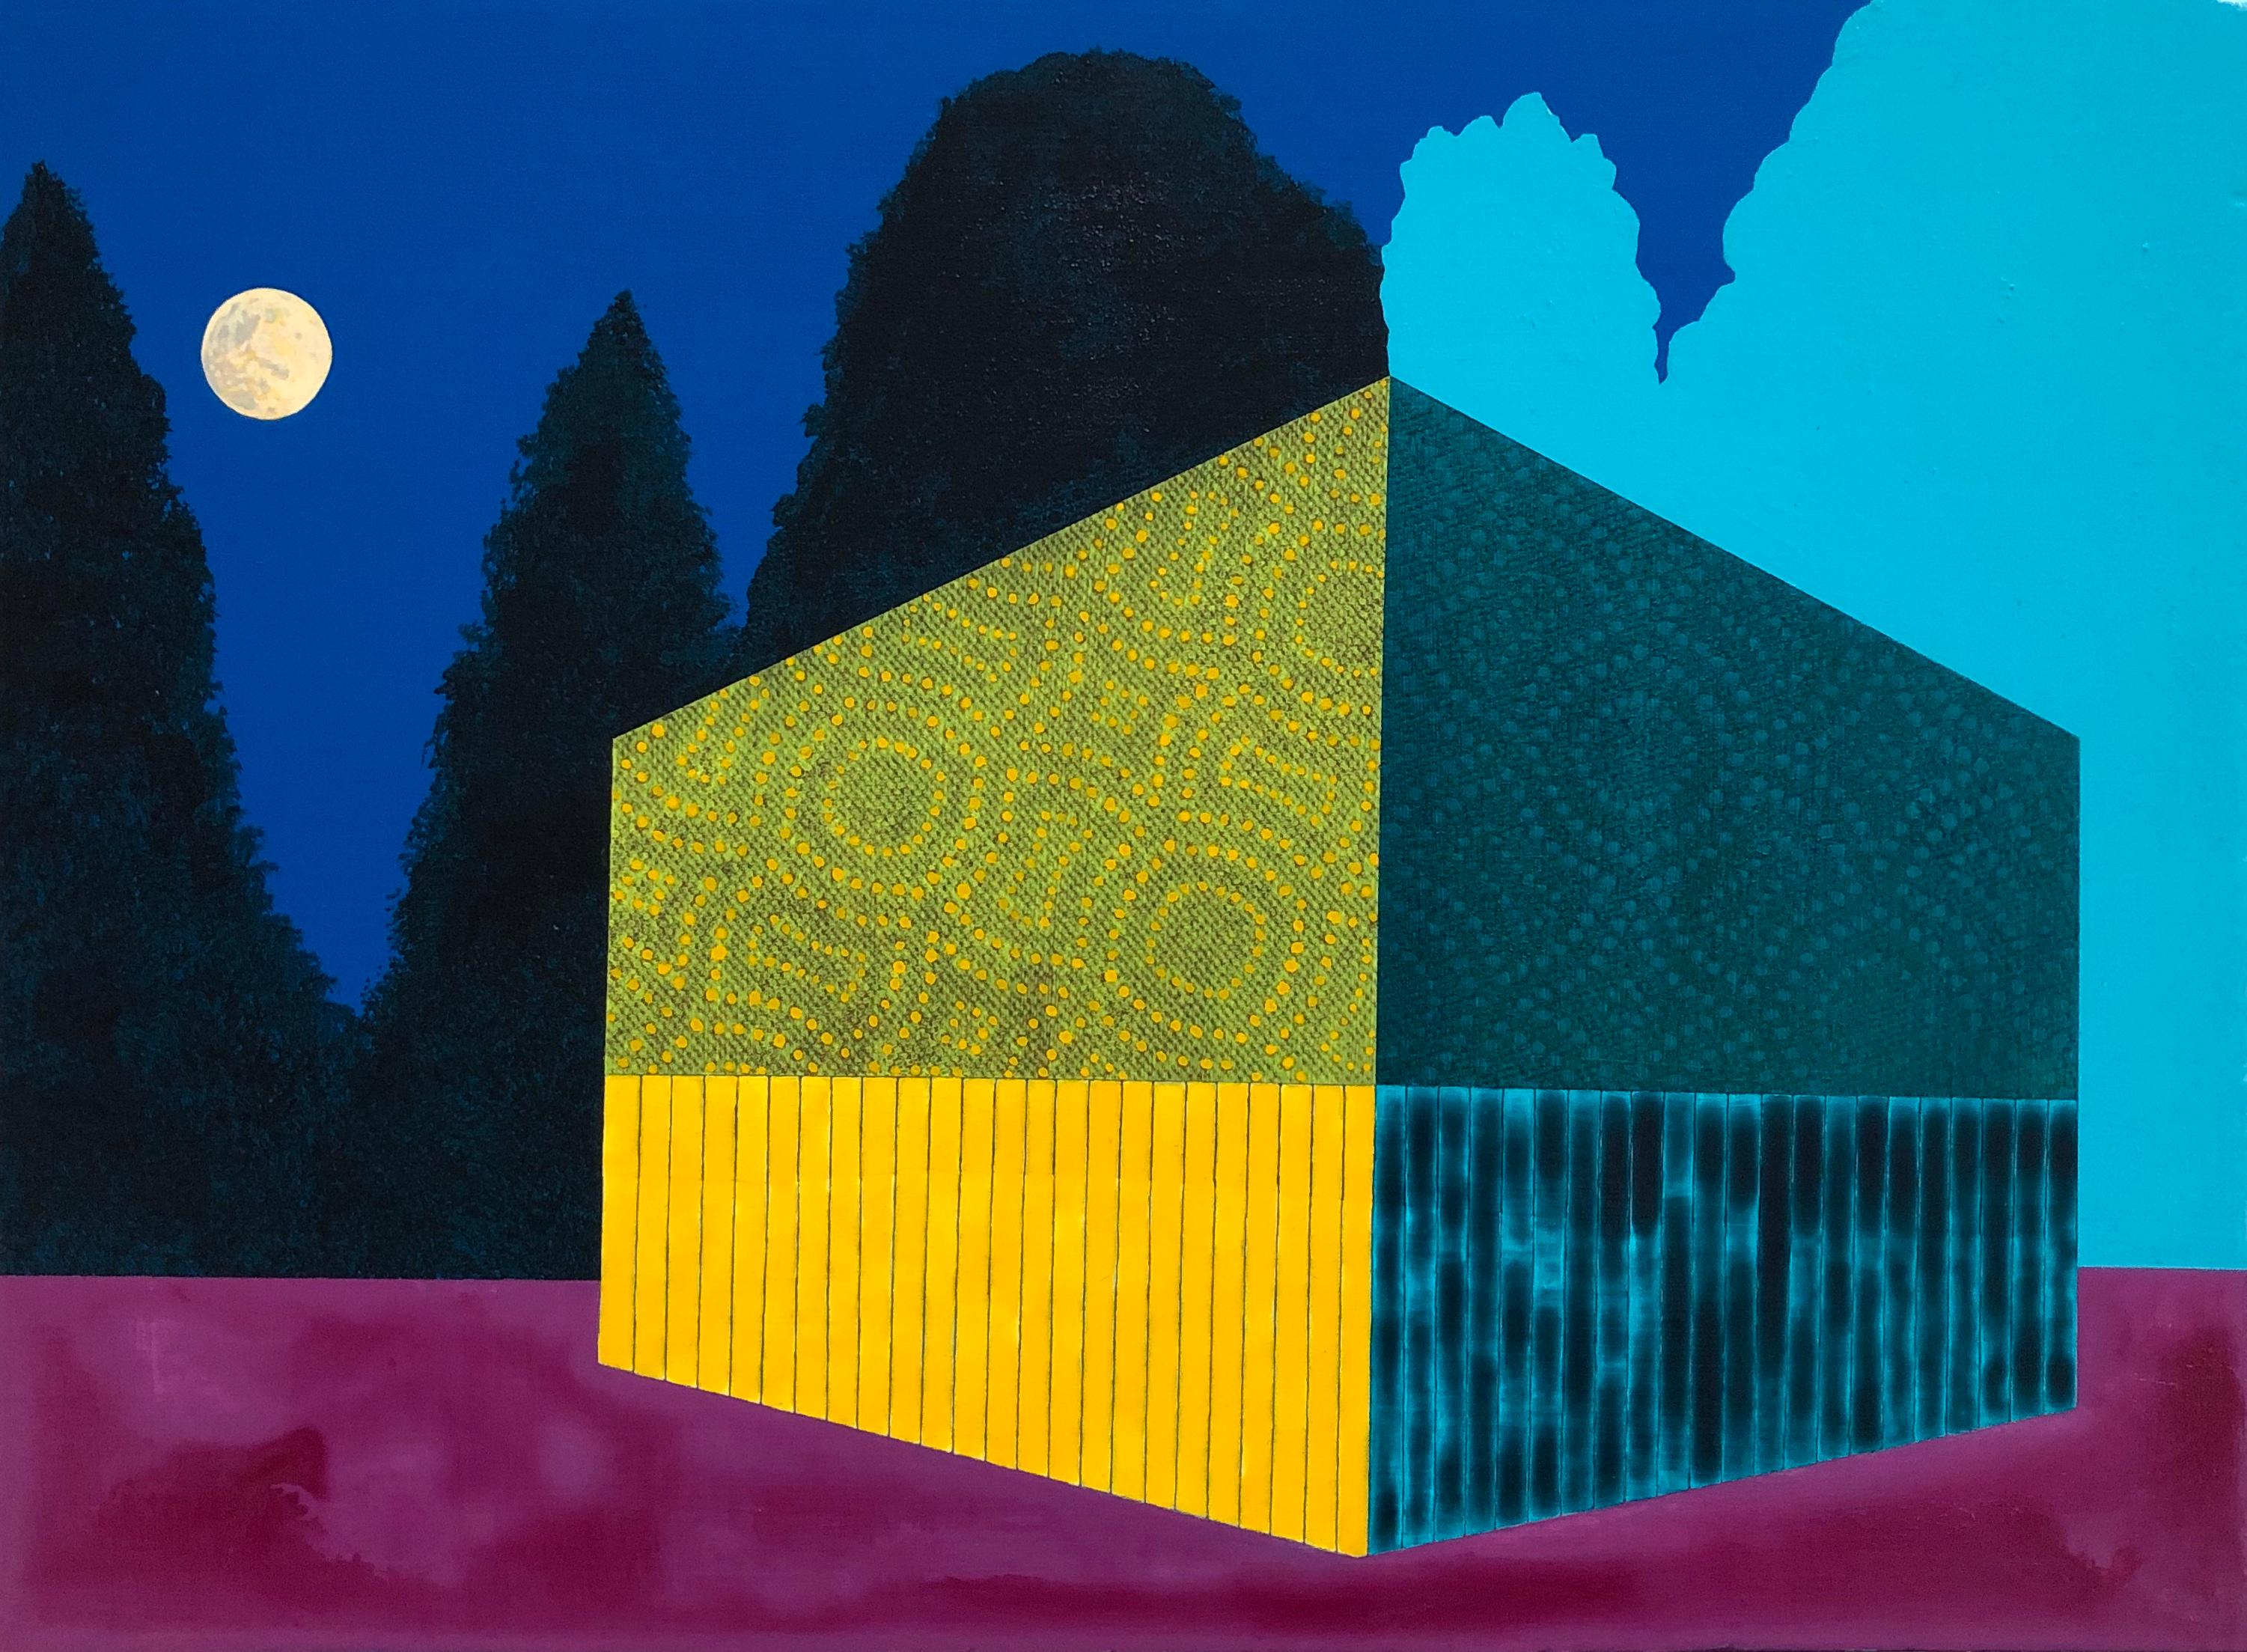 Night Scene, blue, yellow and purple building, painting on panel